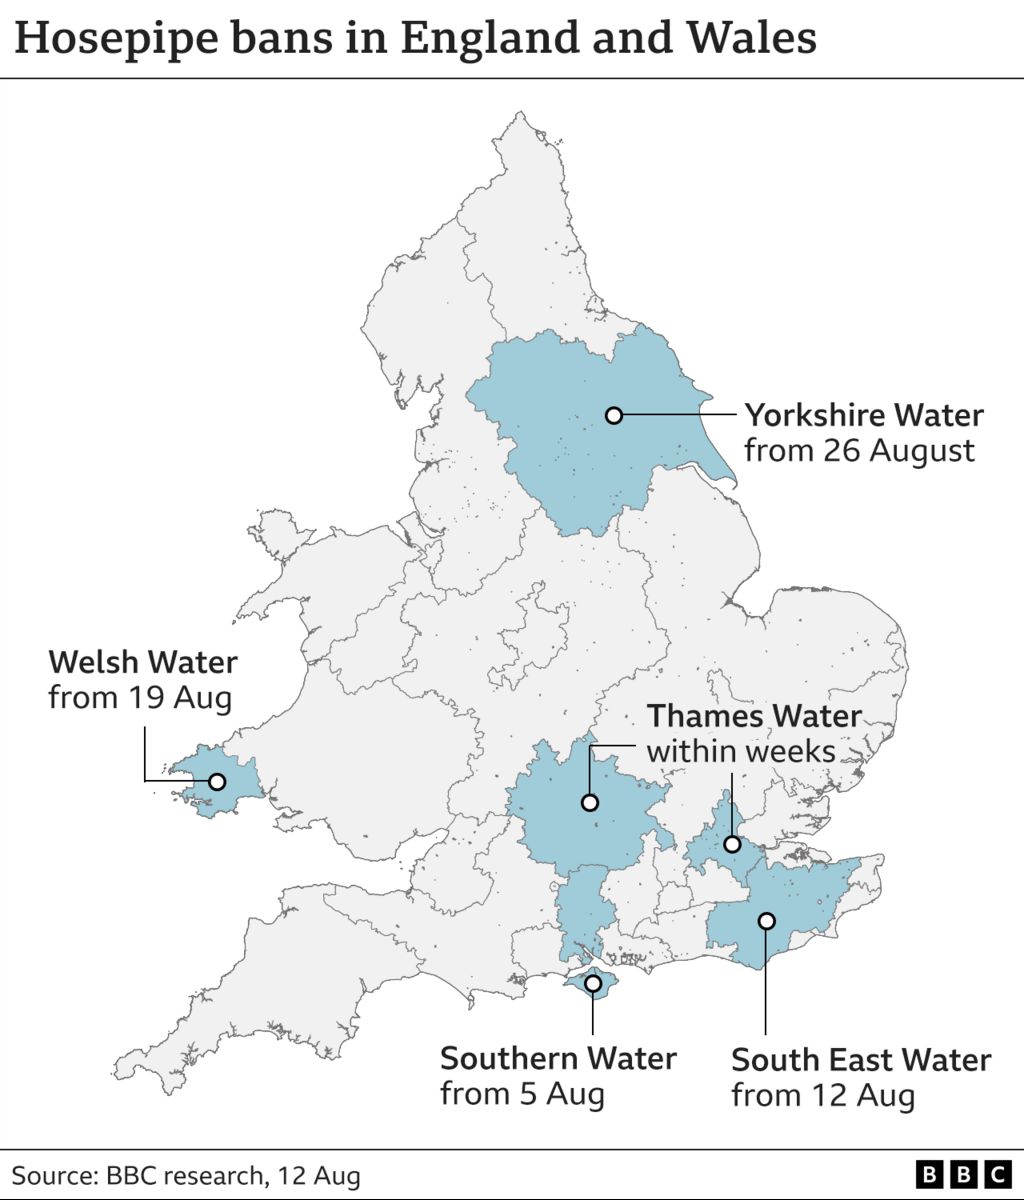 Areas of England and Wales with hosepipe bans